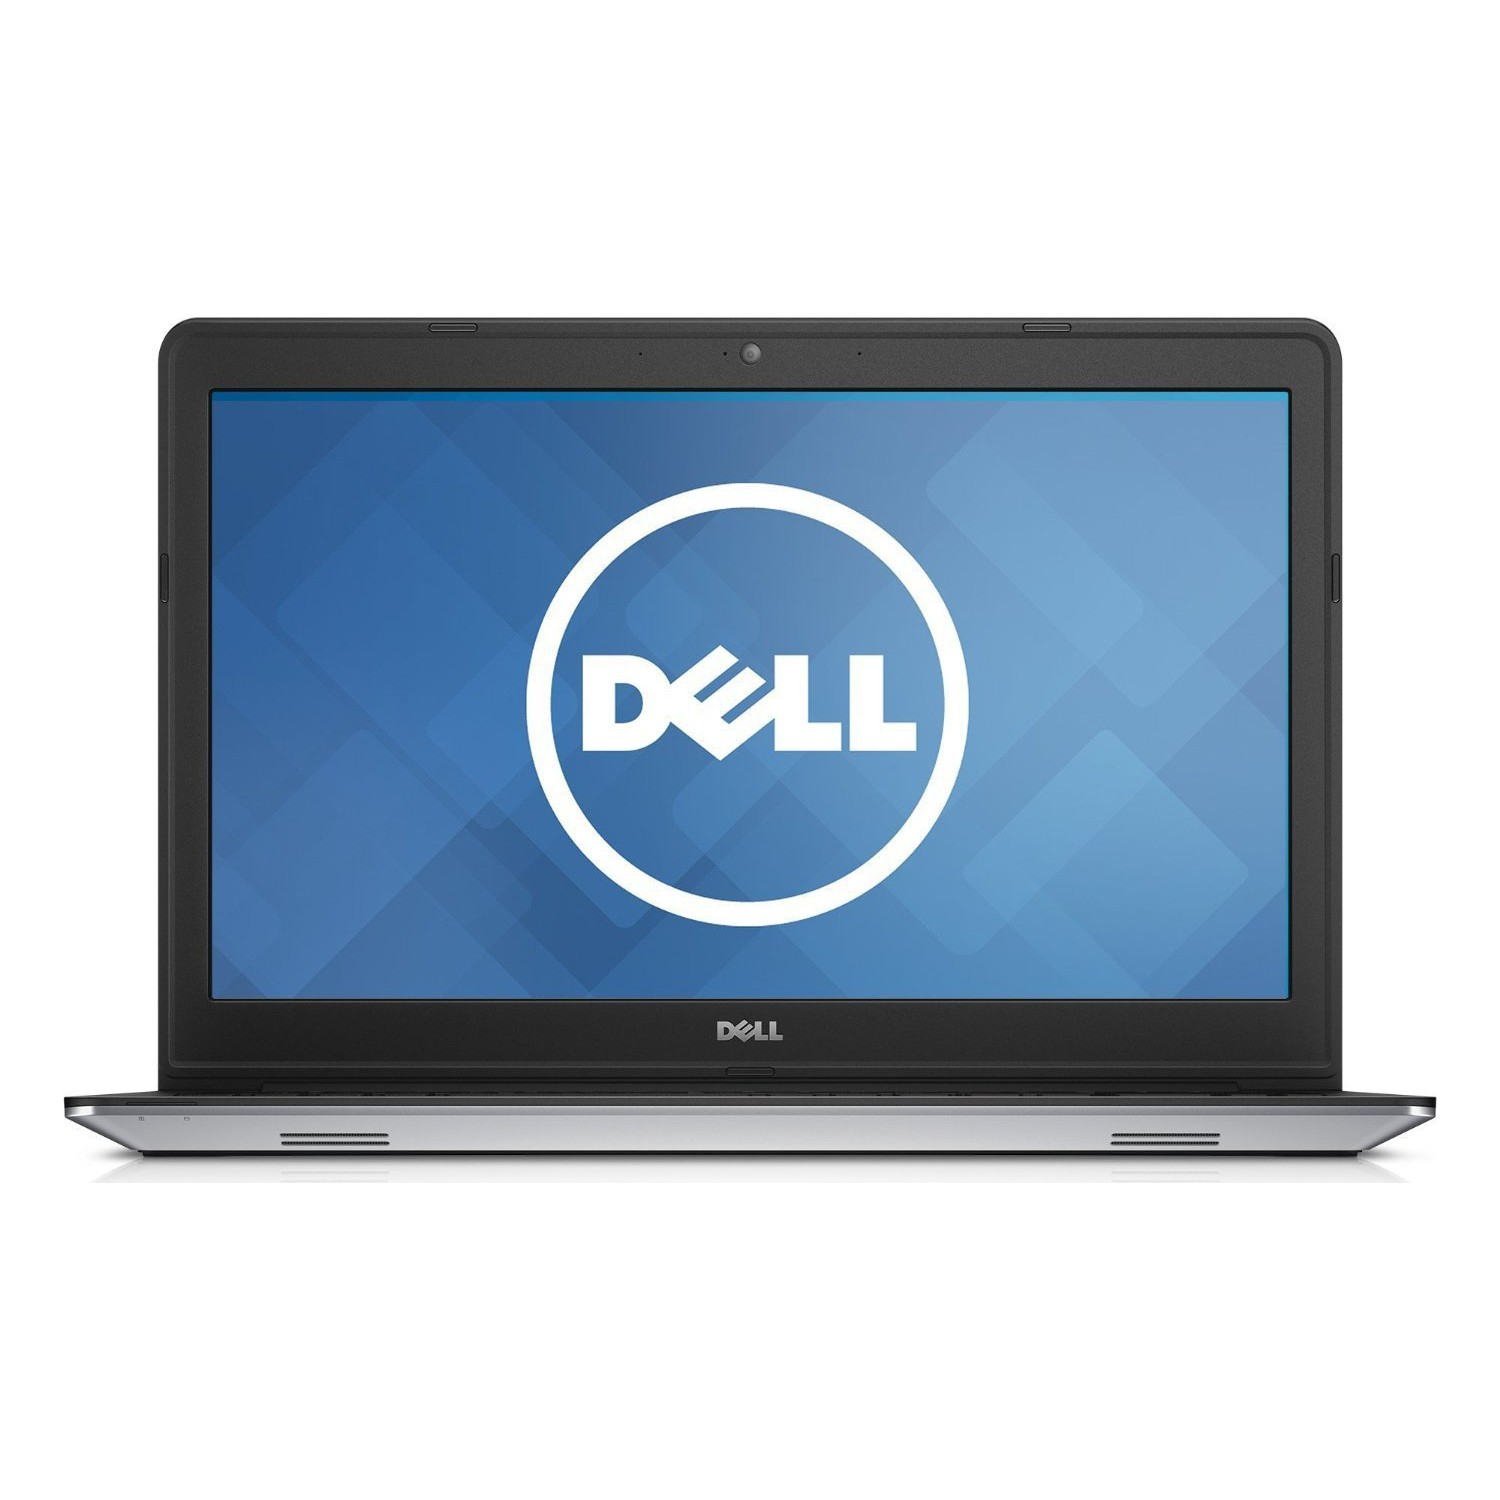  Dell Inspiron 15 7562 Notebook